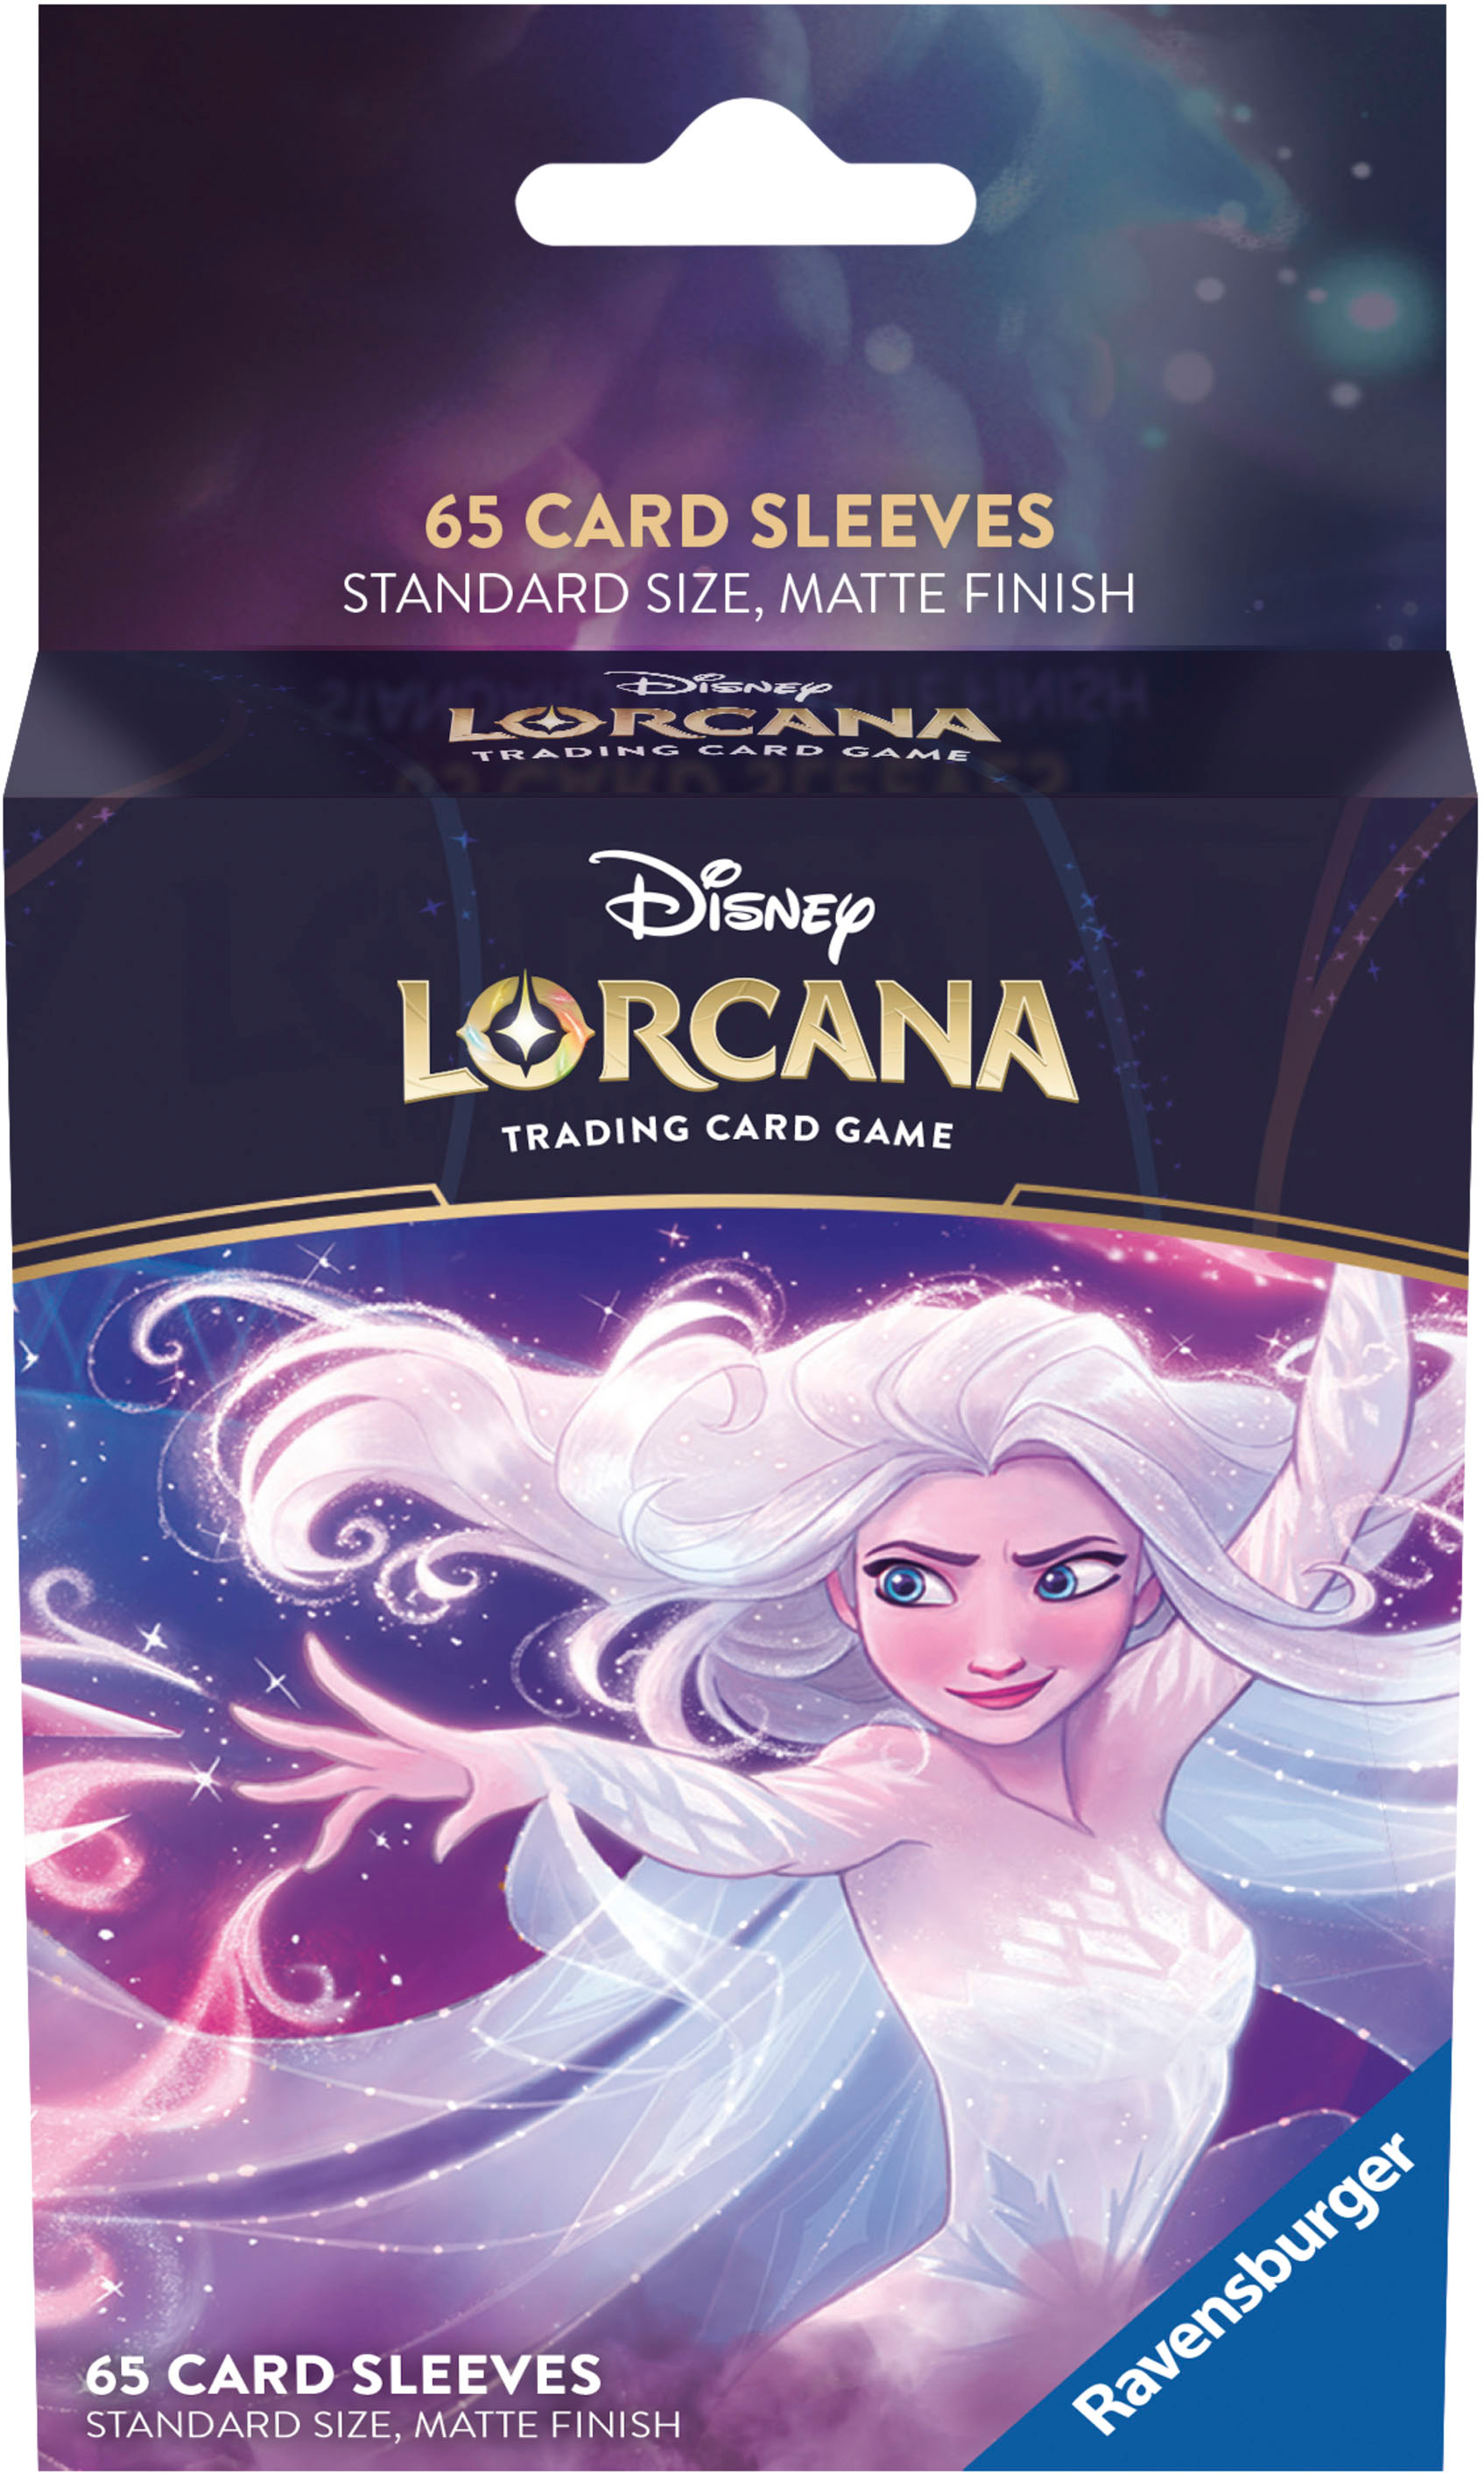 Disney Lorcana card featuring Frozen's Elsa sells for over $7,000